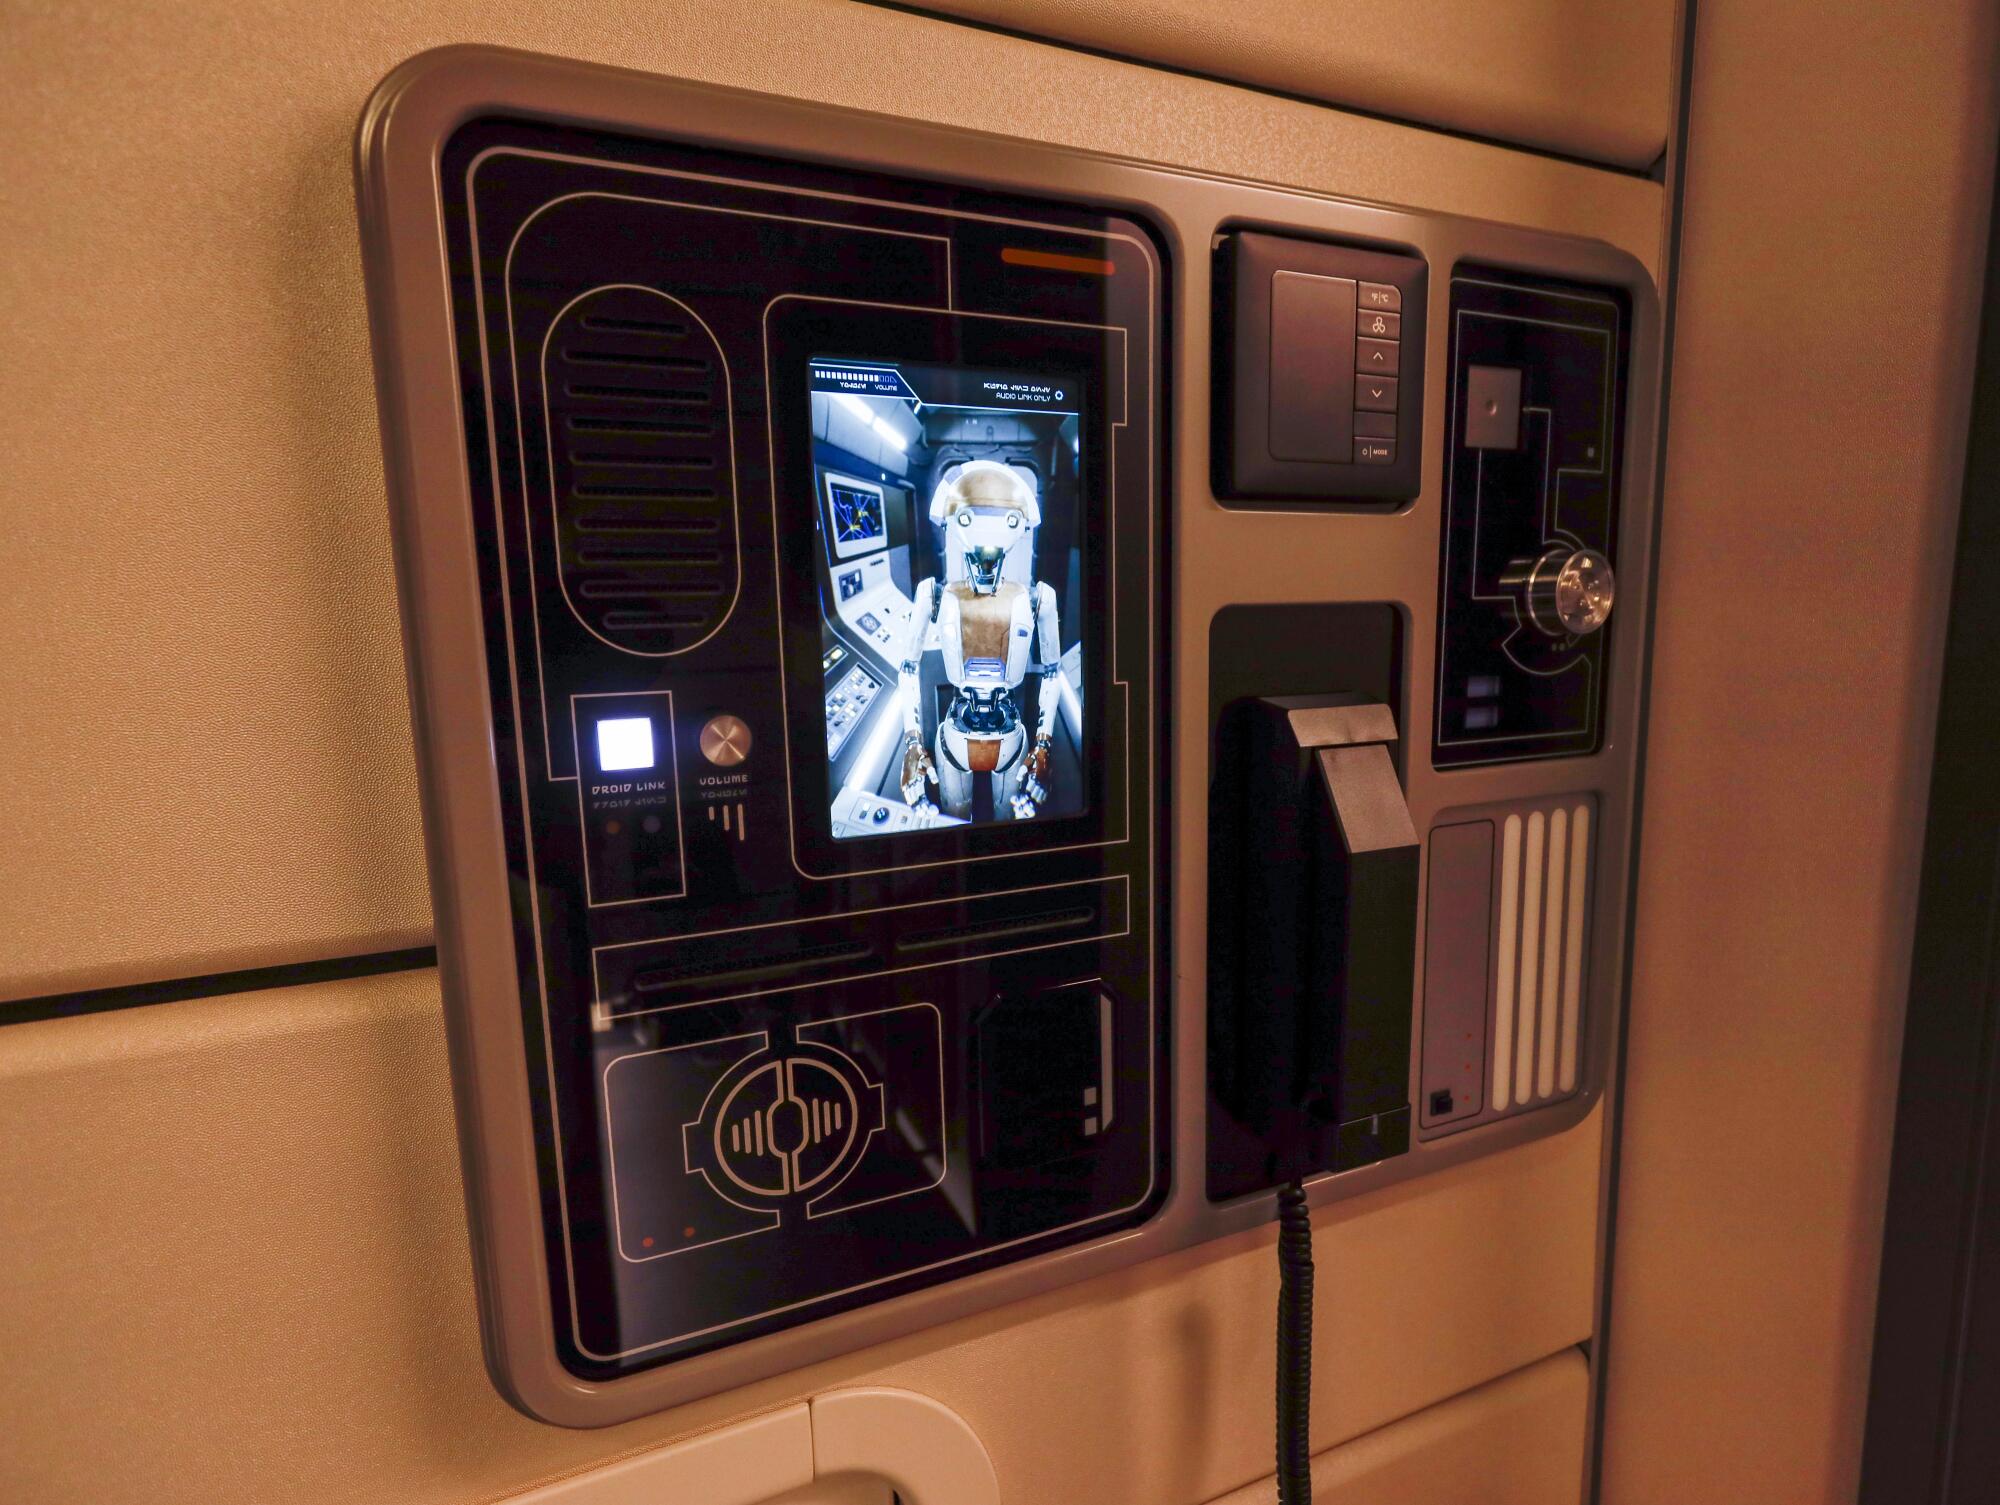 D3-O9, a talkative droid on vidscreens inside rooms at the Halcyon ship, greets guests.